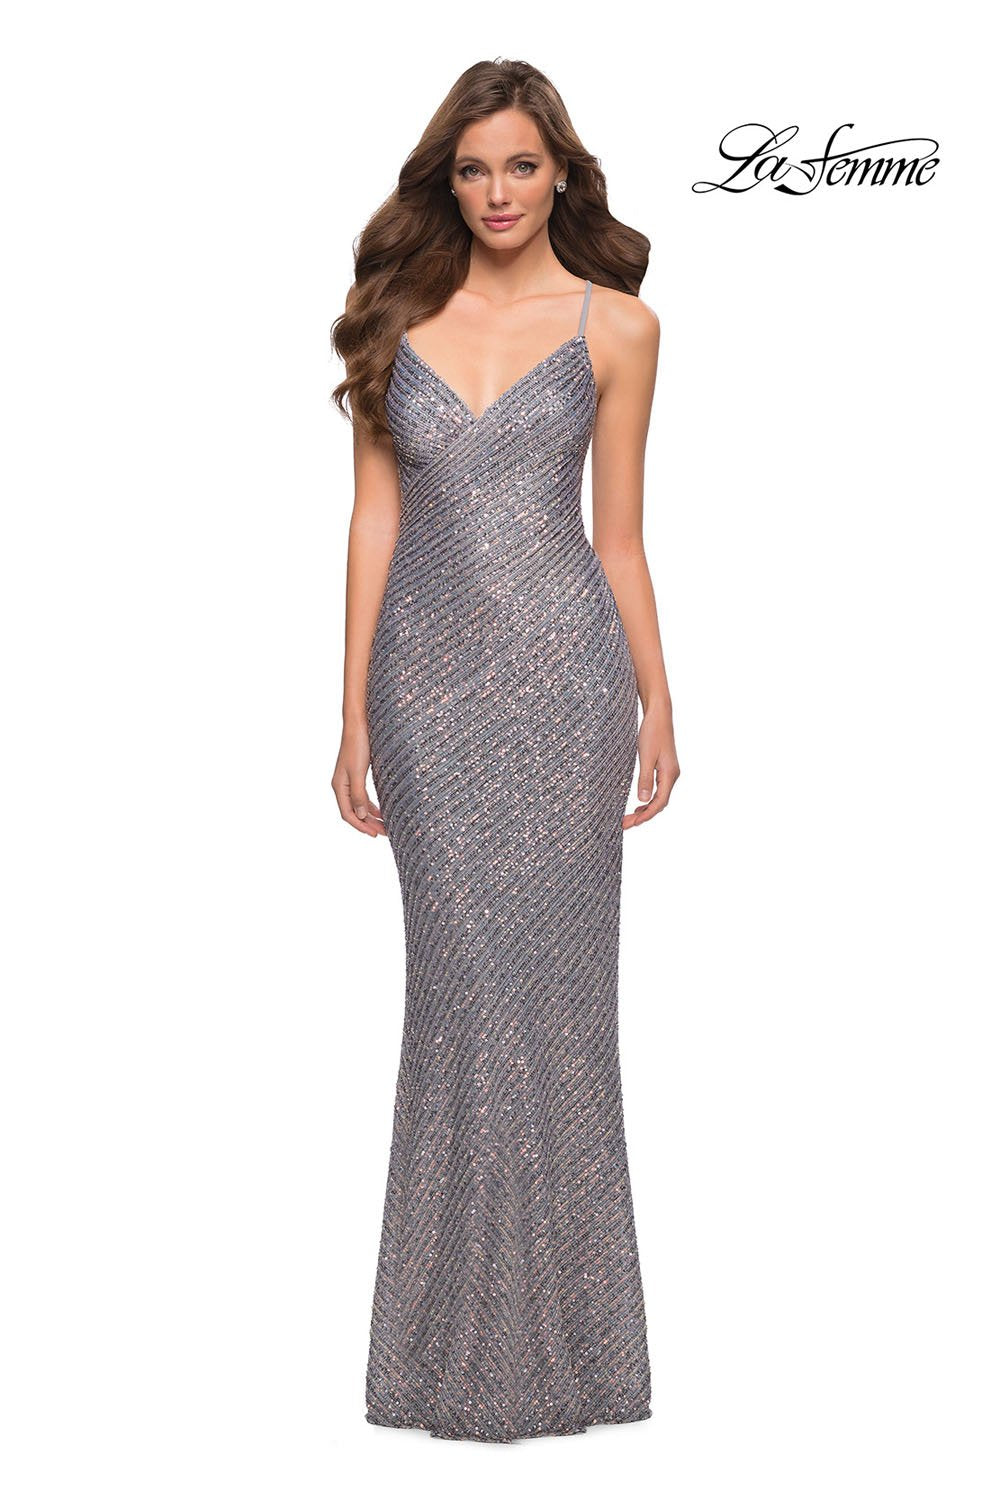 La Femme 29895 dress images in these colors: Silver.